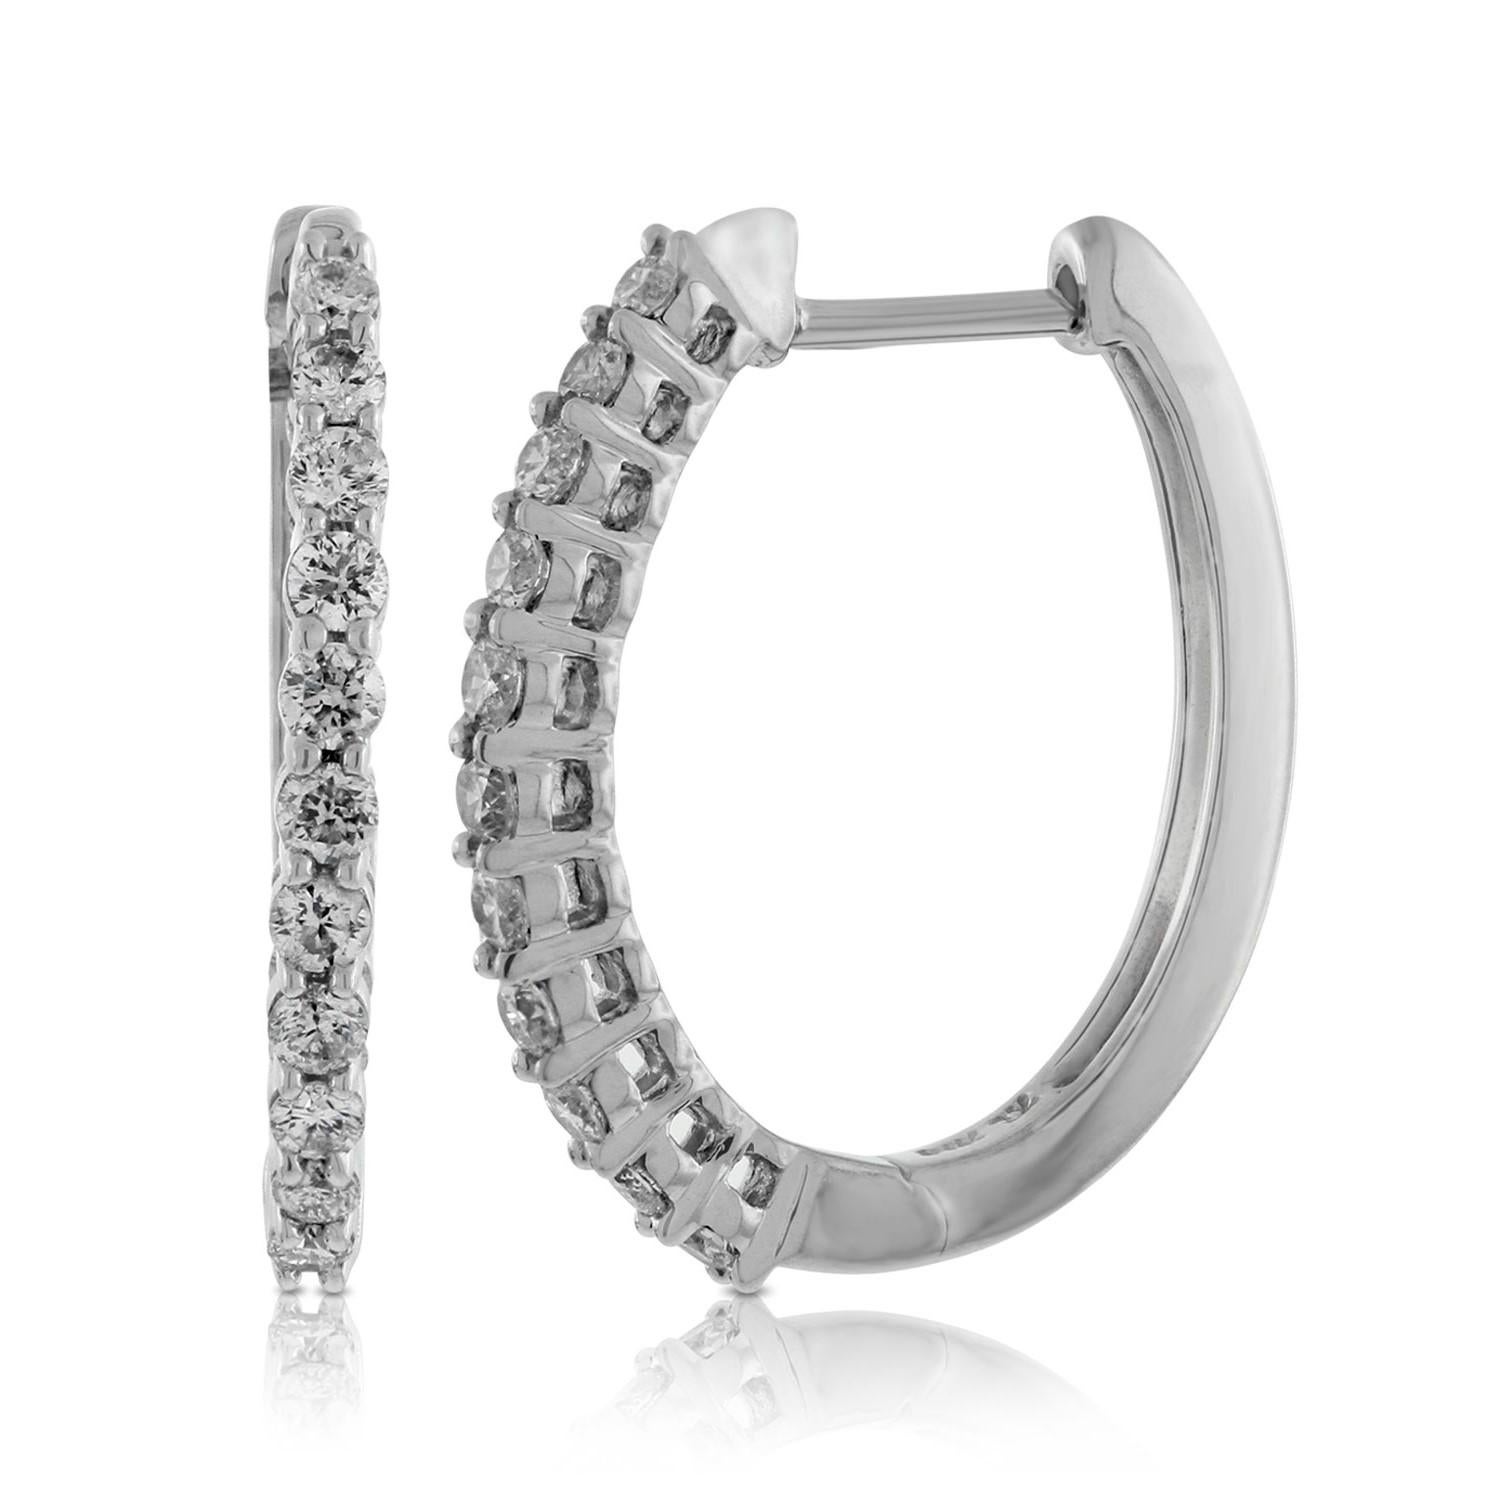 Nothing says luxury like an incredible pair of diamond round hoop earrings. These stunning brightly polished 14 karat white gold inside out round-shaped hoop earrings feature a total of 26 round brilliant cut diamonds totaling 1.00 carats are prong